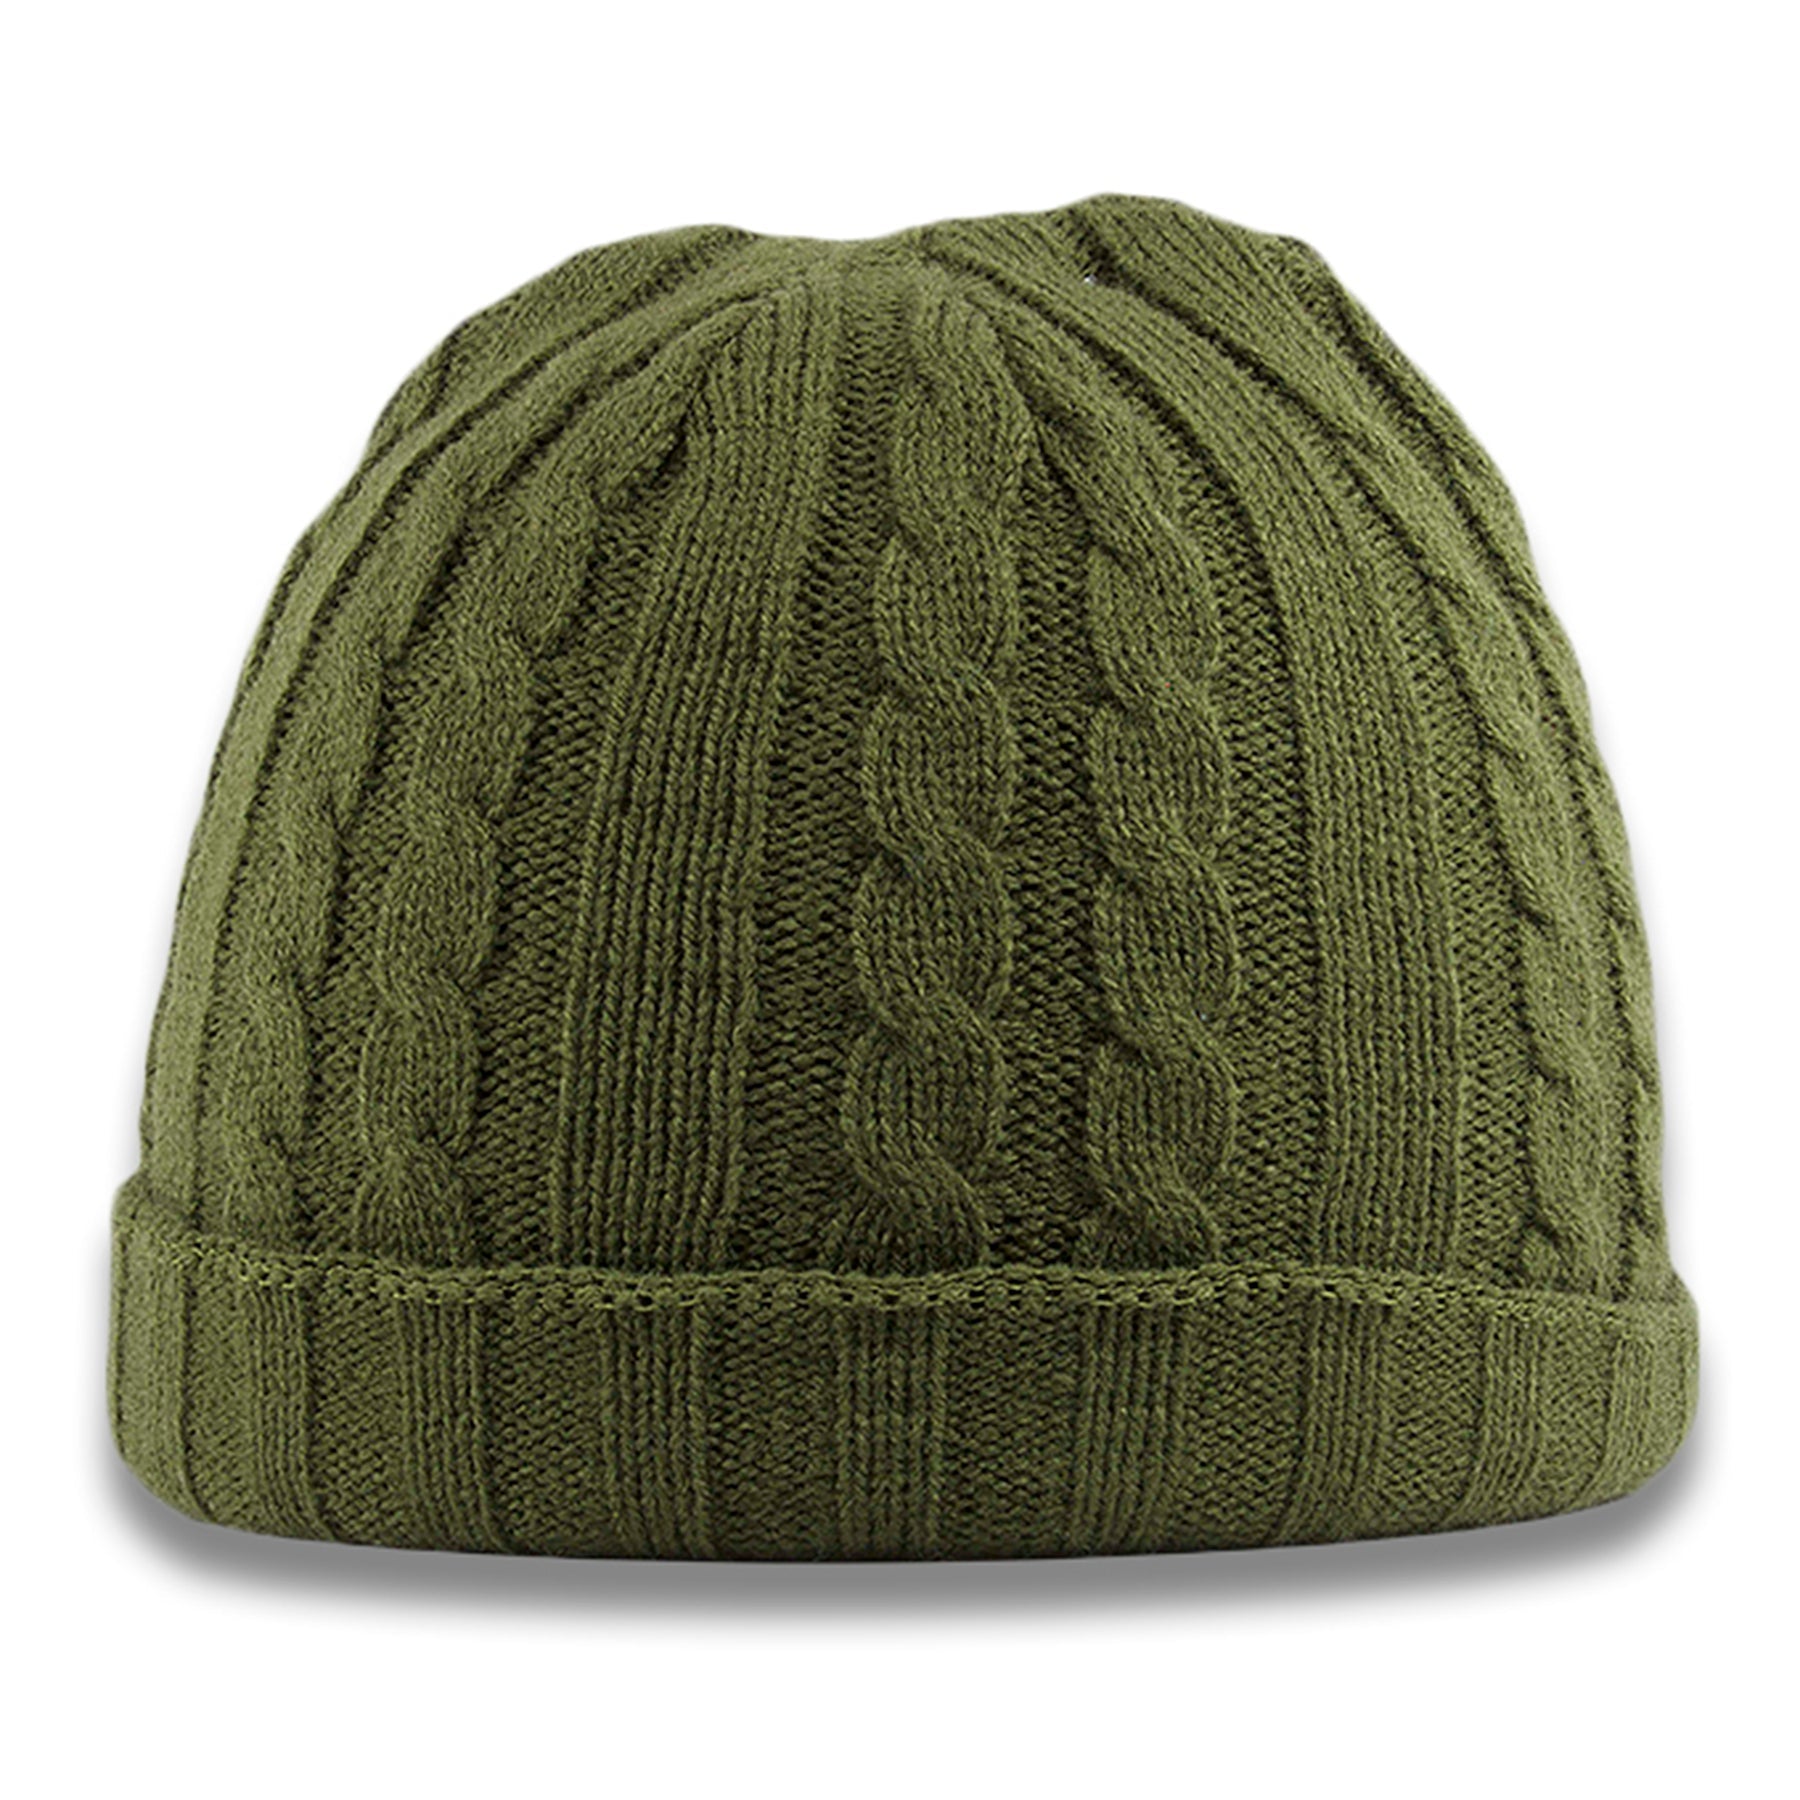 The olive cable knit beanie is olive green with a cable knit patter